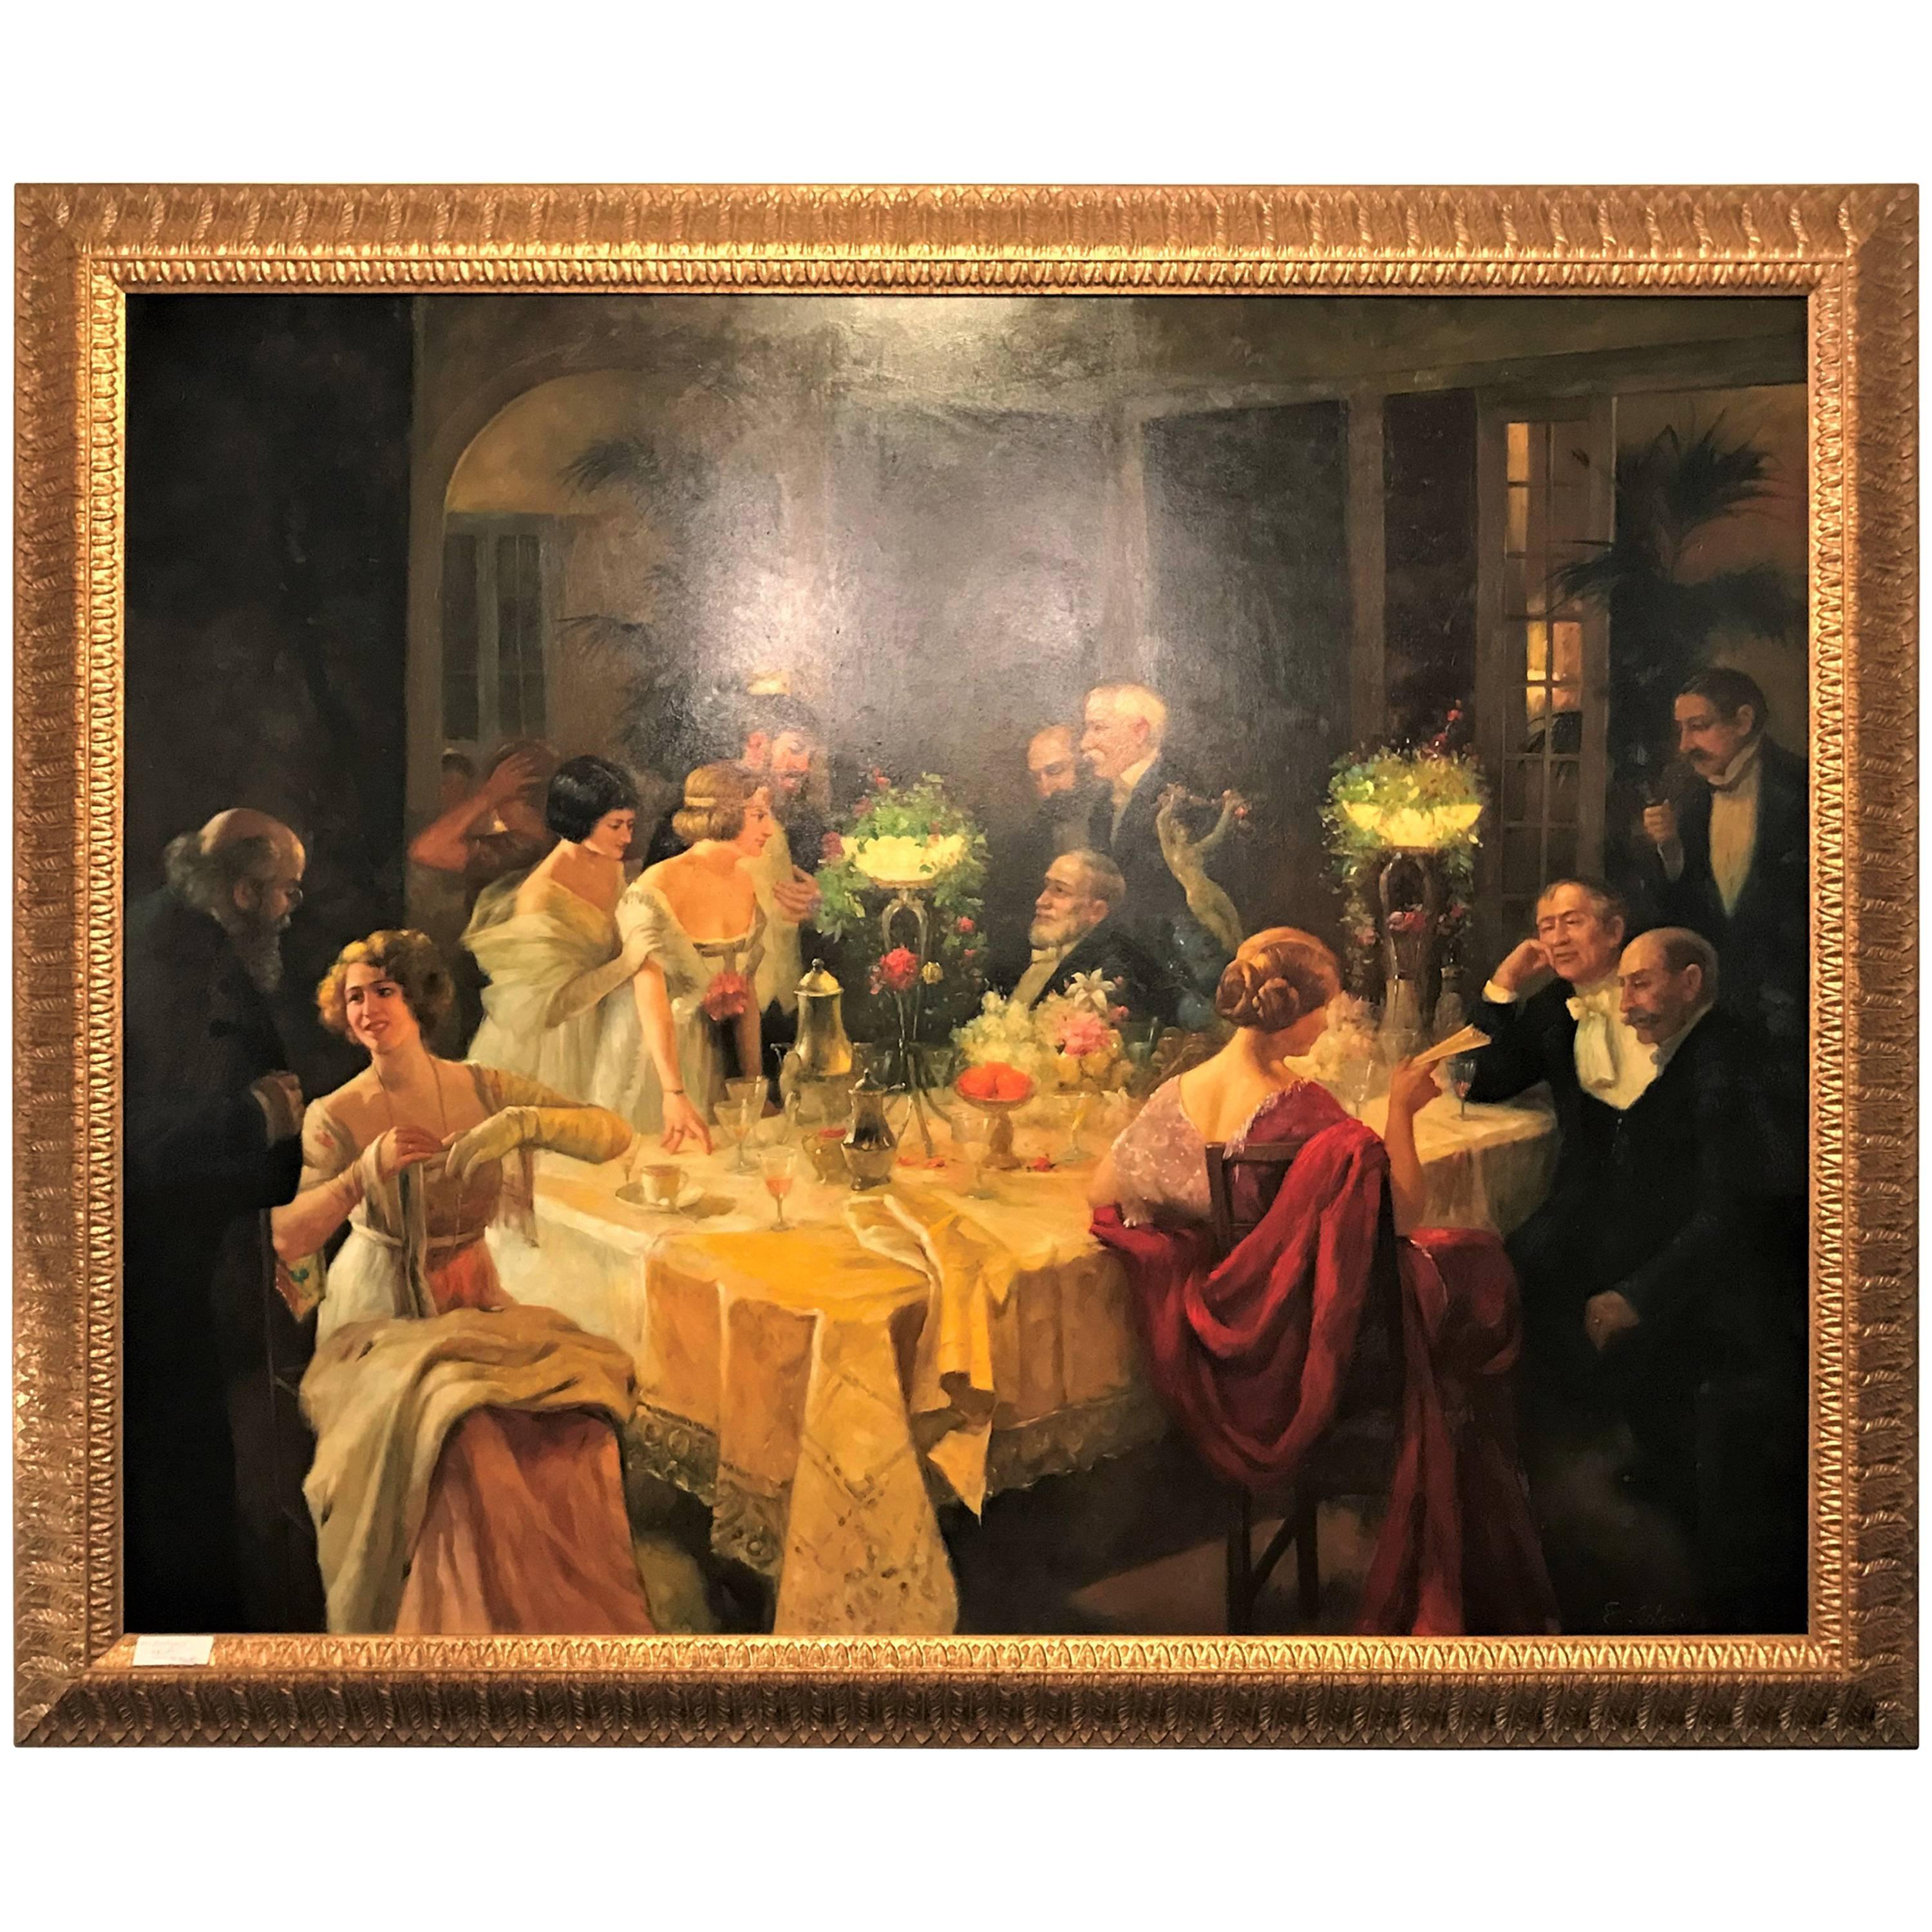 Monumental Print Painting Oil on Canvas of a Party Scene in a Great Gilt Frame